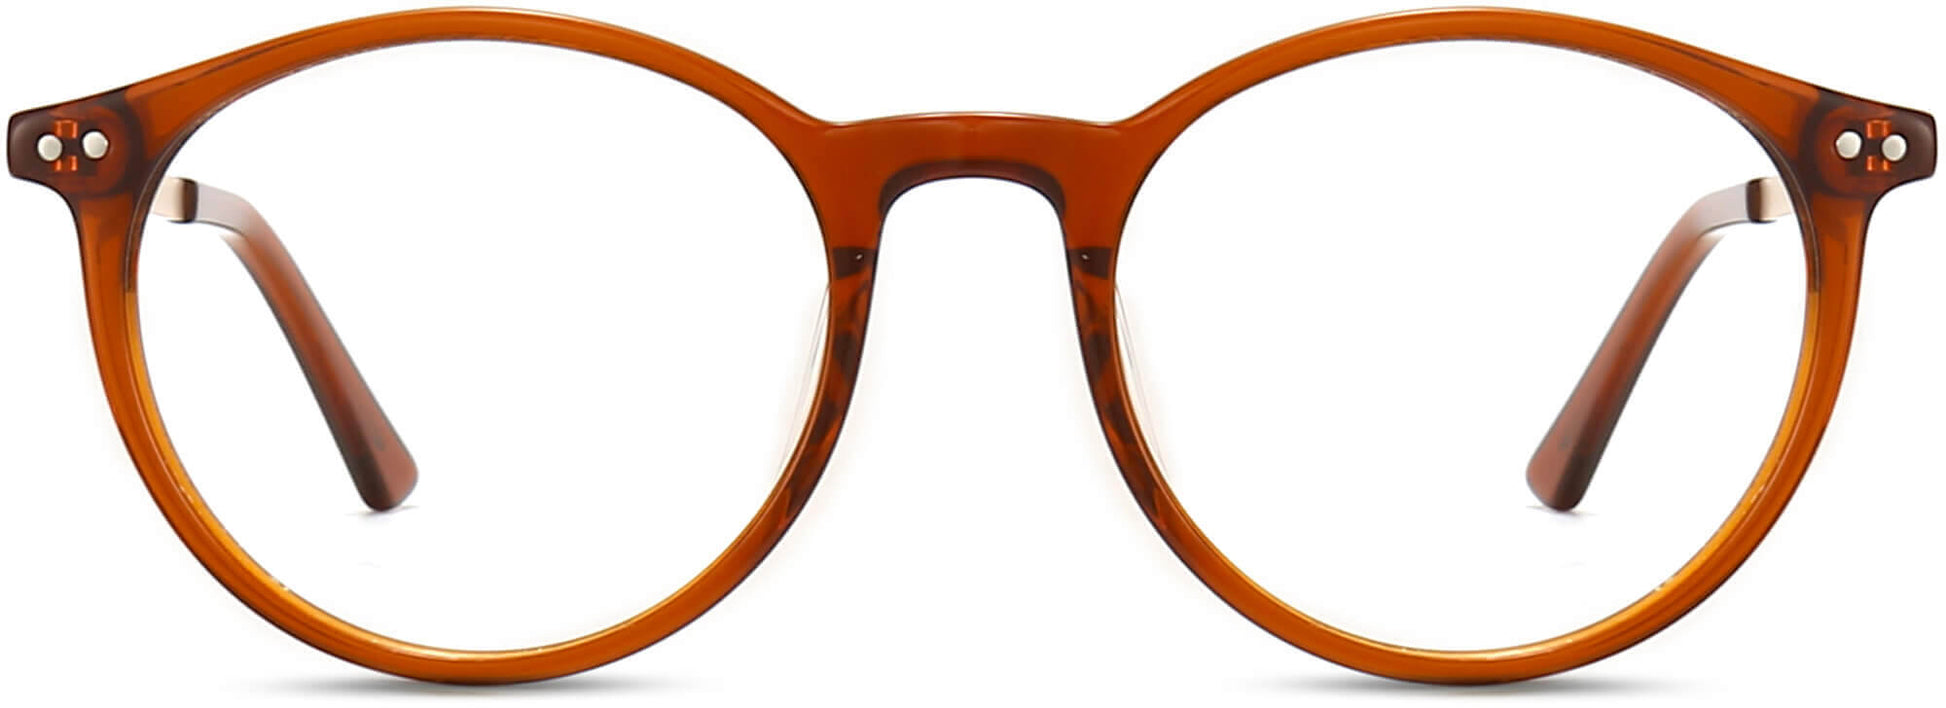 Dallas Round Brown Eyeglasses from ANRRI, front view